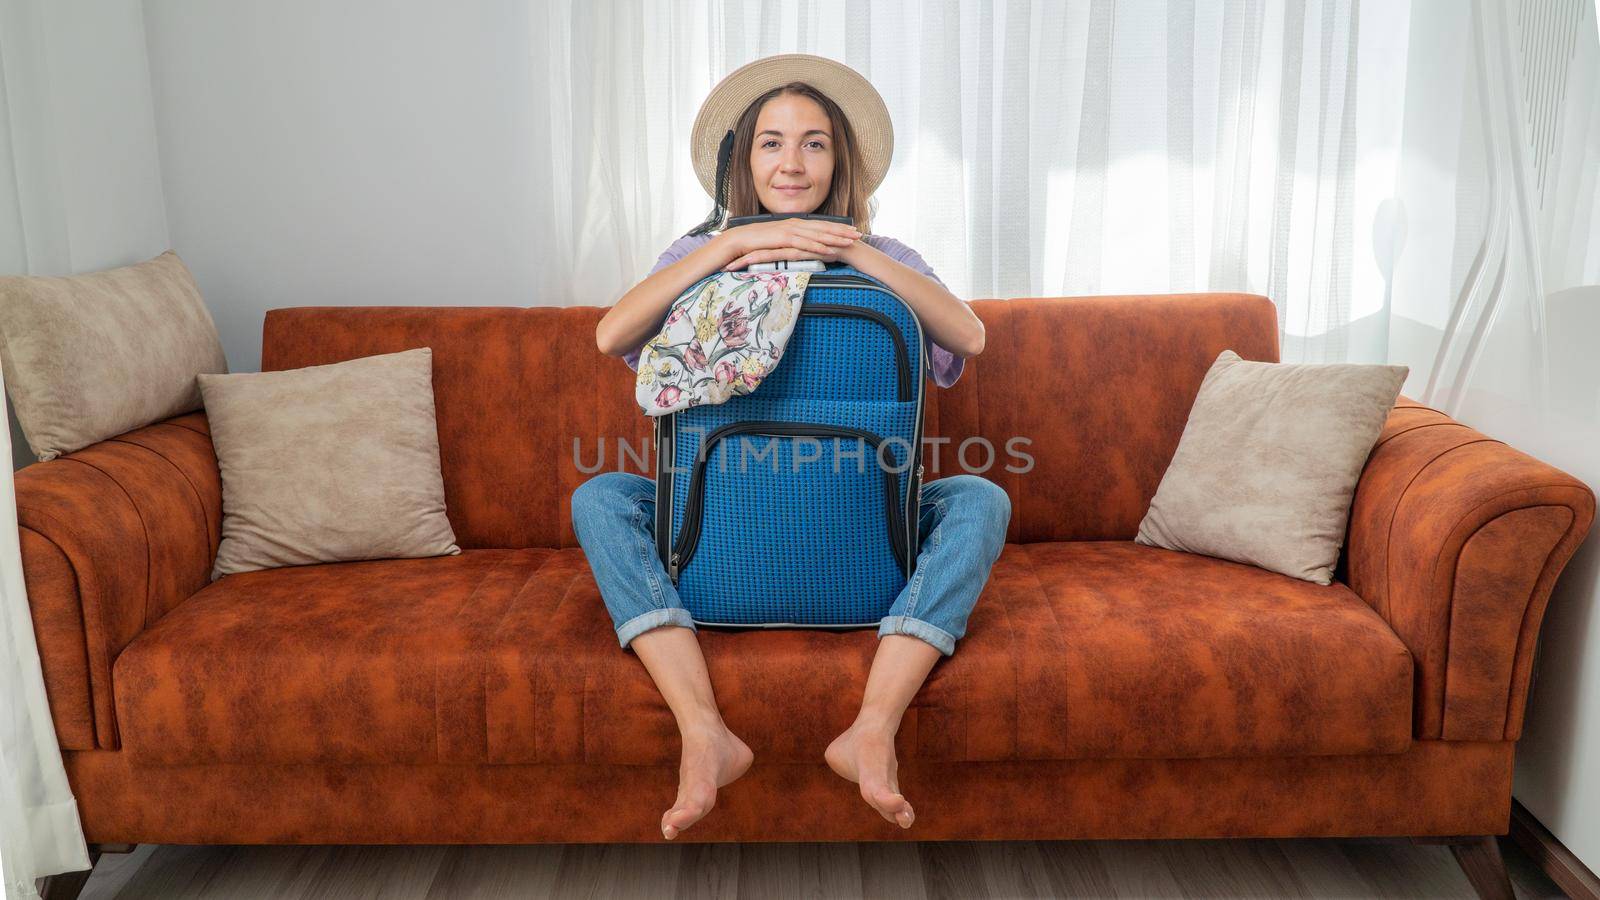 A satisfied woman with a packed suitcase on the couch, ready to travel by voktybre